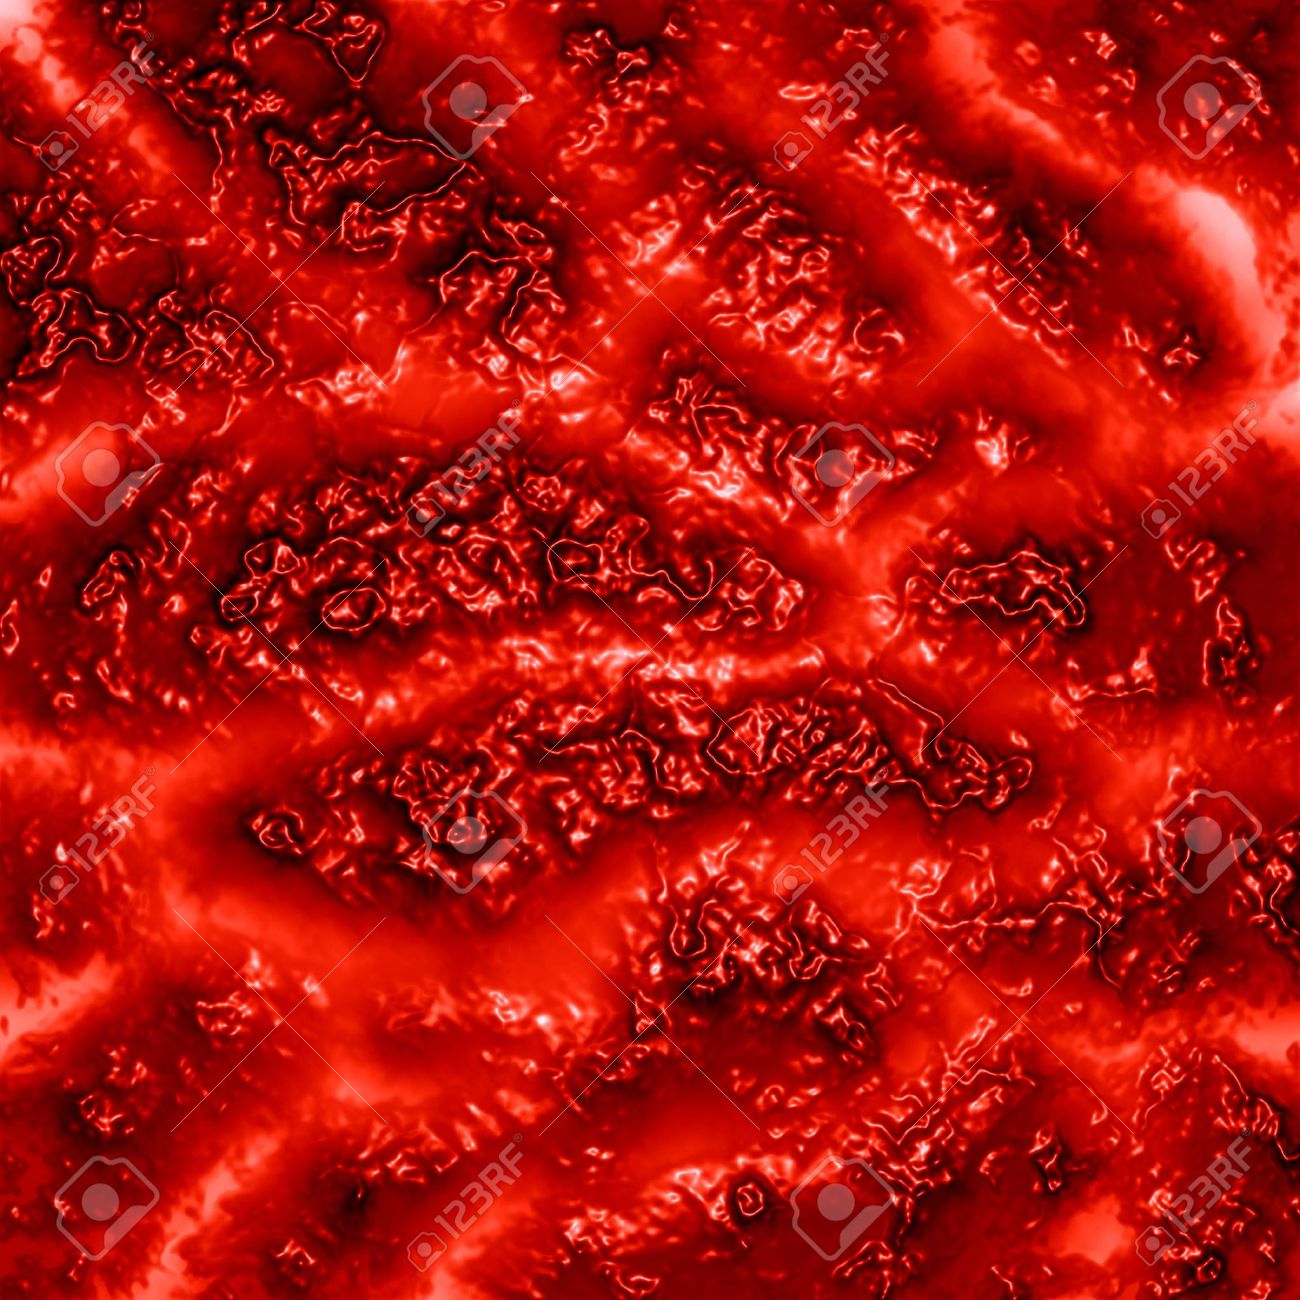 Human Tissue Or Veins On A Red Background Stock Photo Picture And